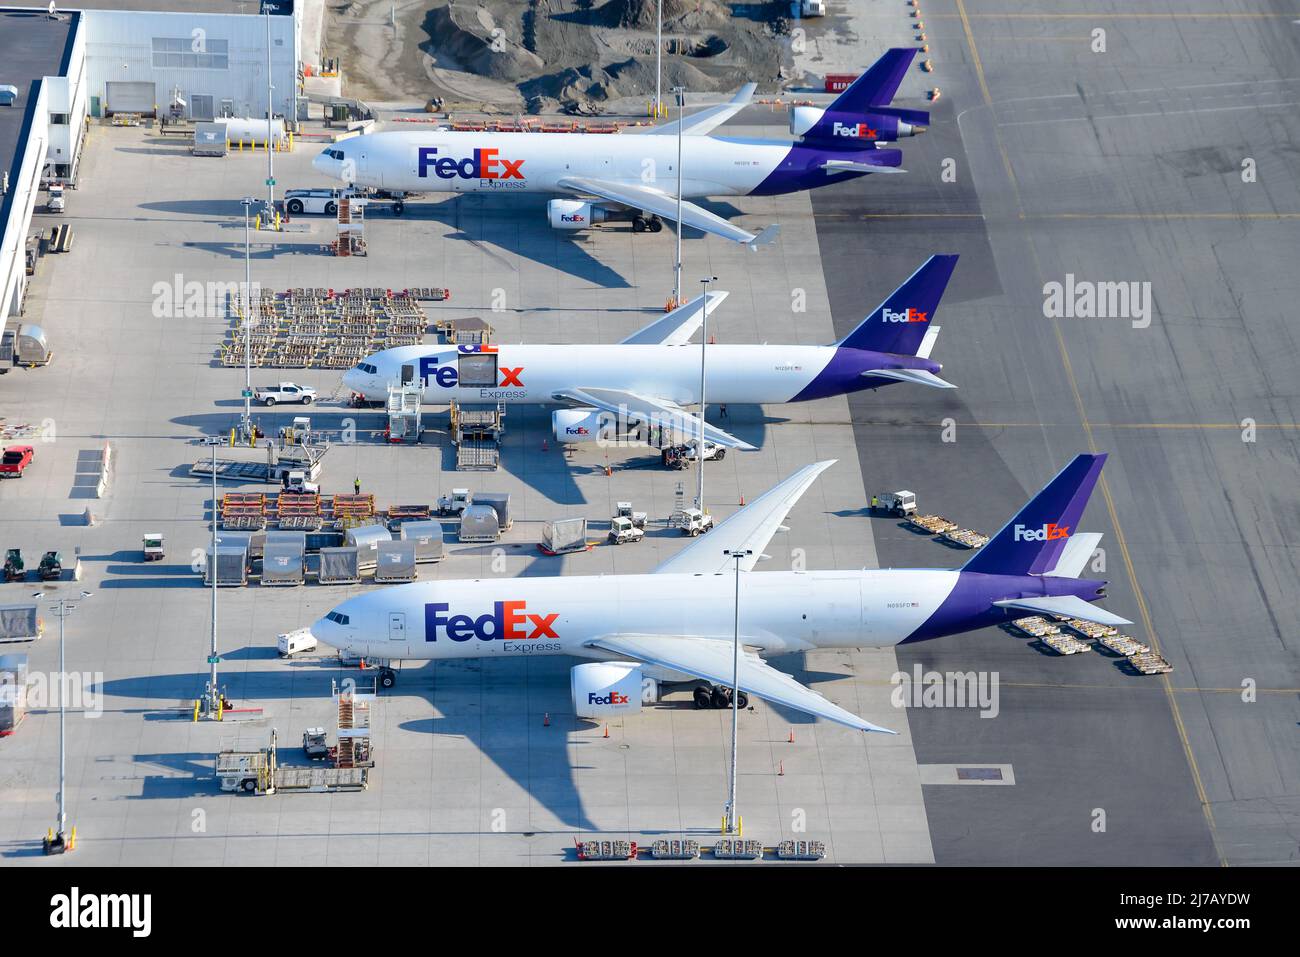 Aircraft of FedEx Cargo at Anchorage Airport, a hub for freight transportation for Federal Express. Line up of freighter airplanes. Stock Photo